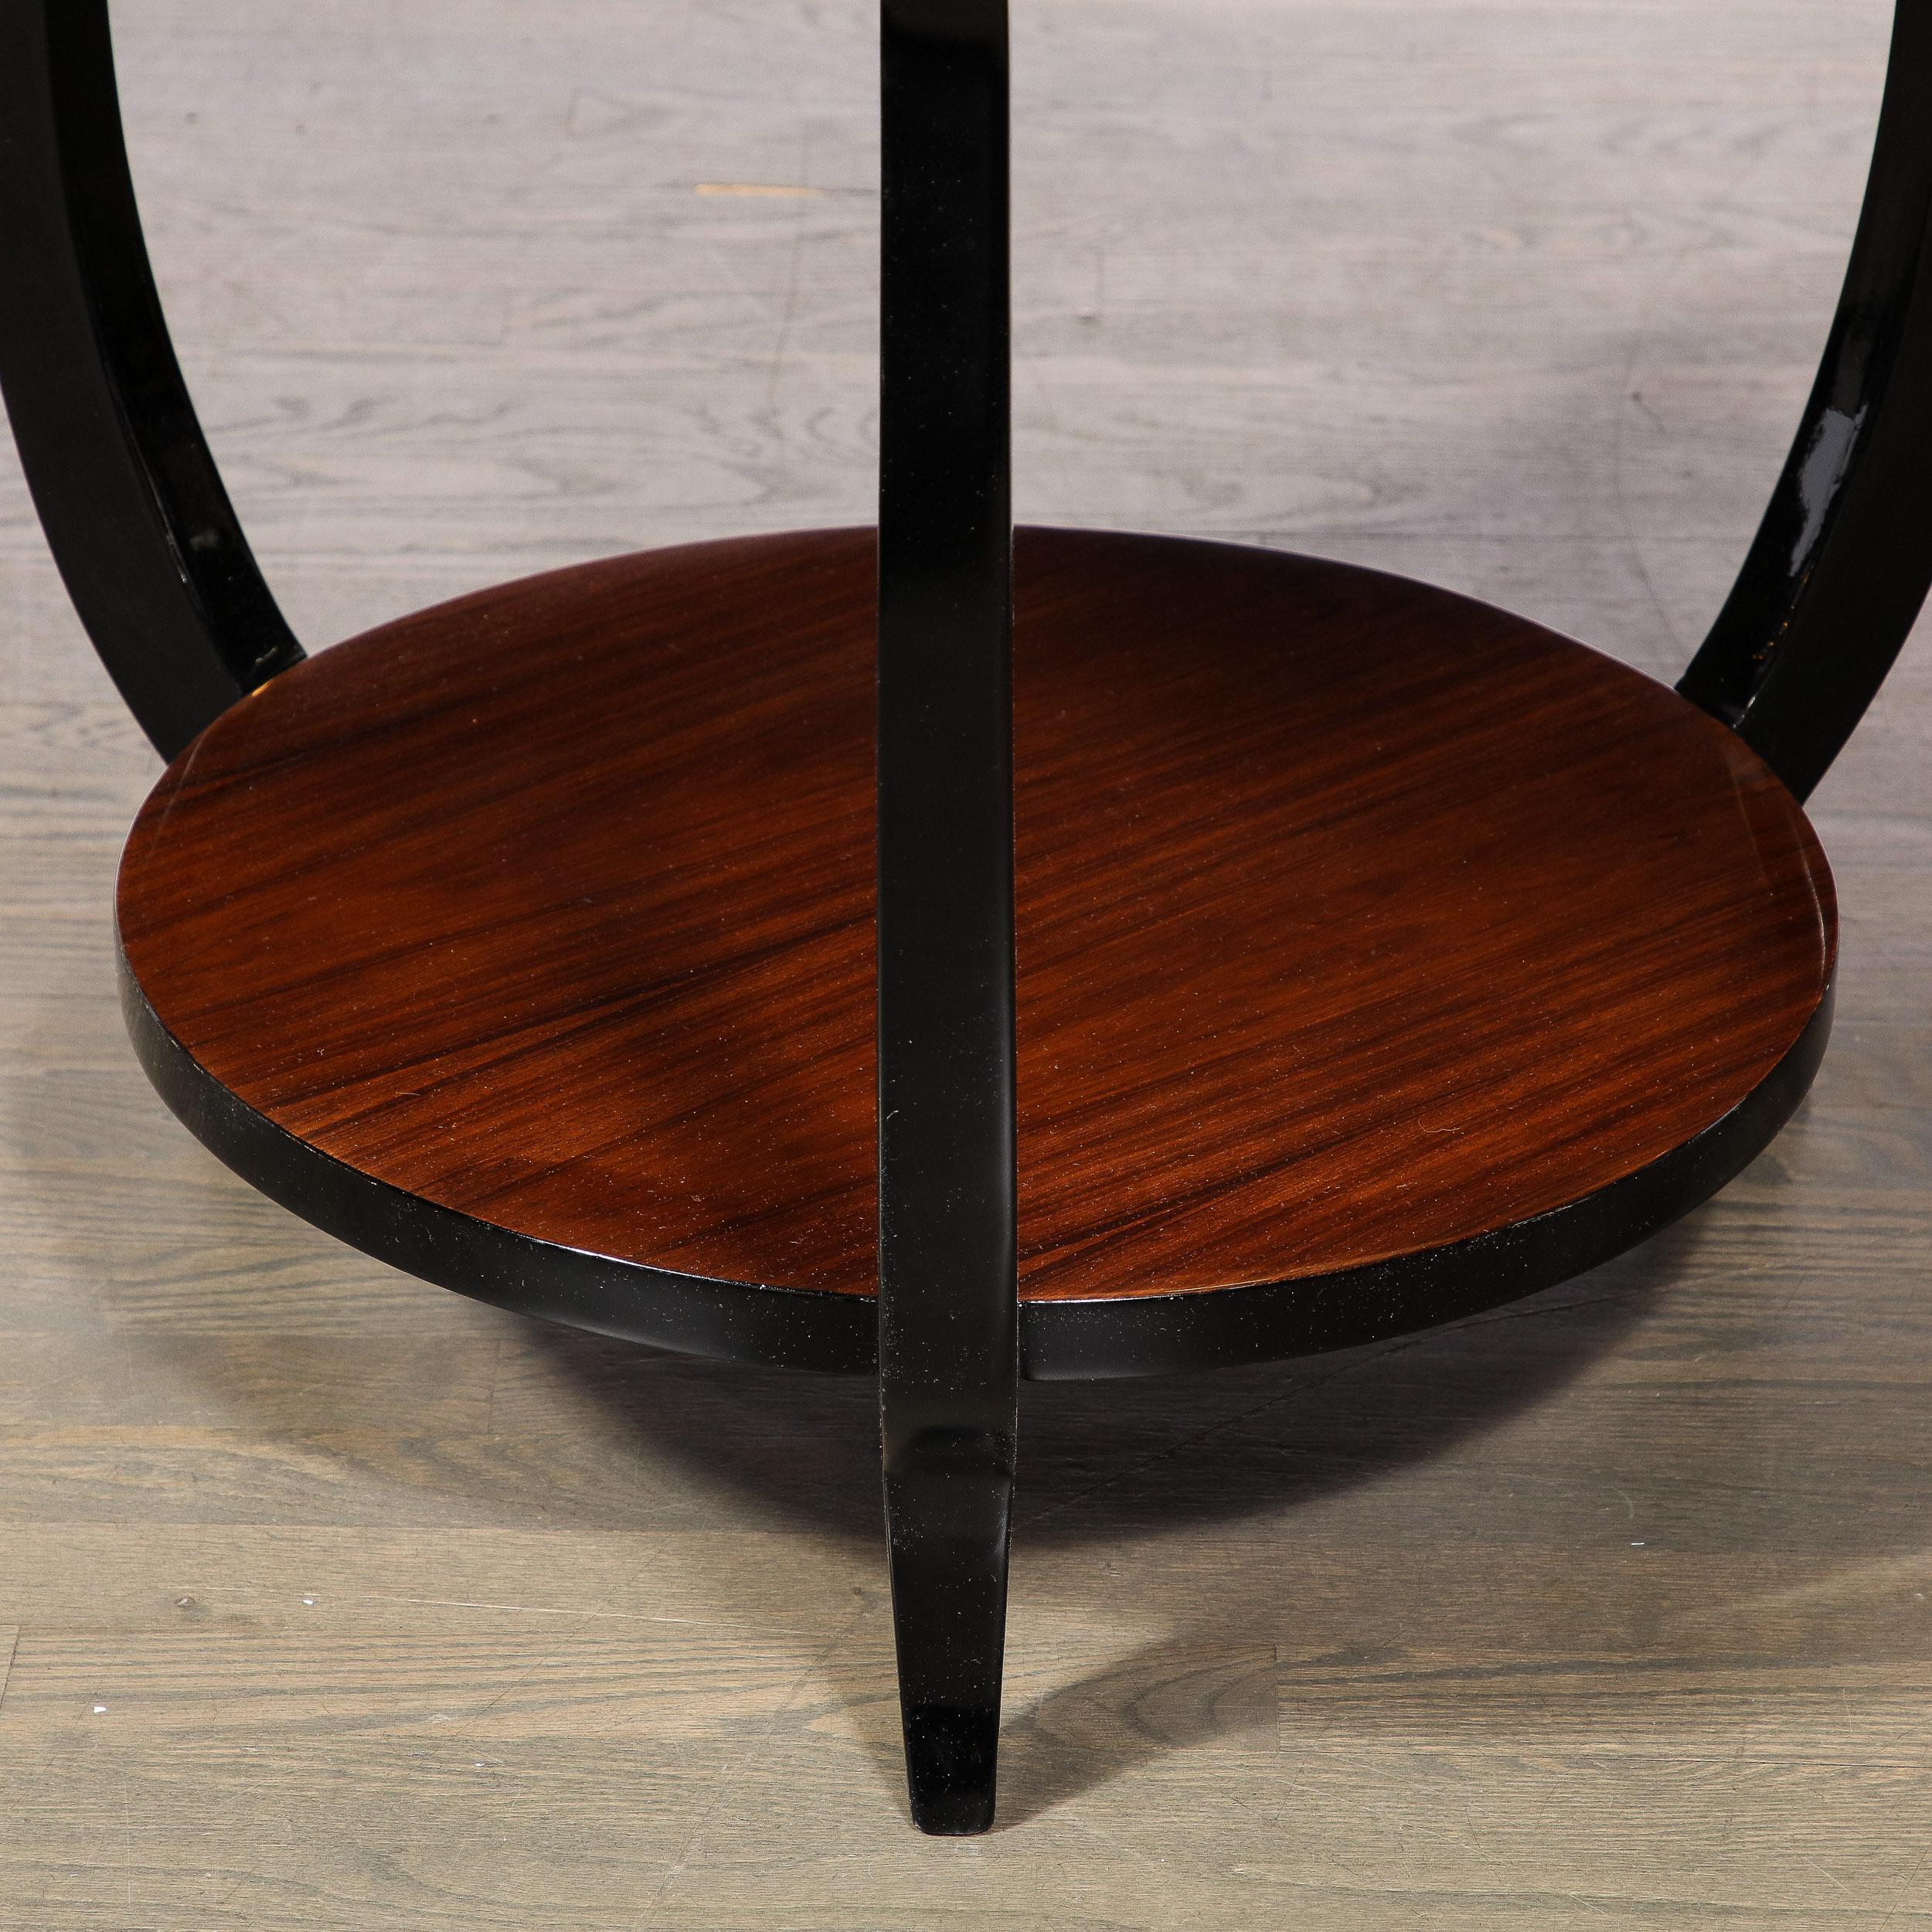 Art Deco Two-Tier Gueridon Table in Book-matched Walnut & Black Lacquer  For Sale 2